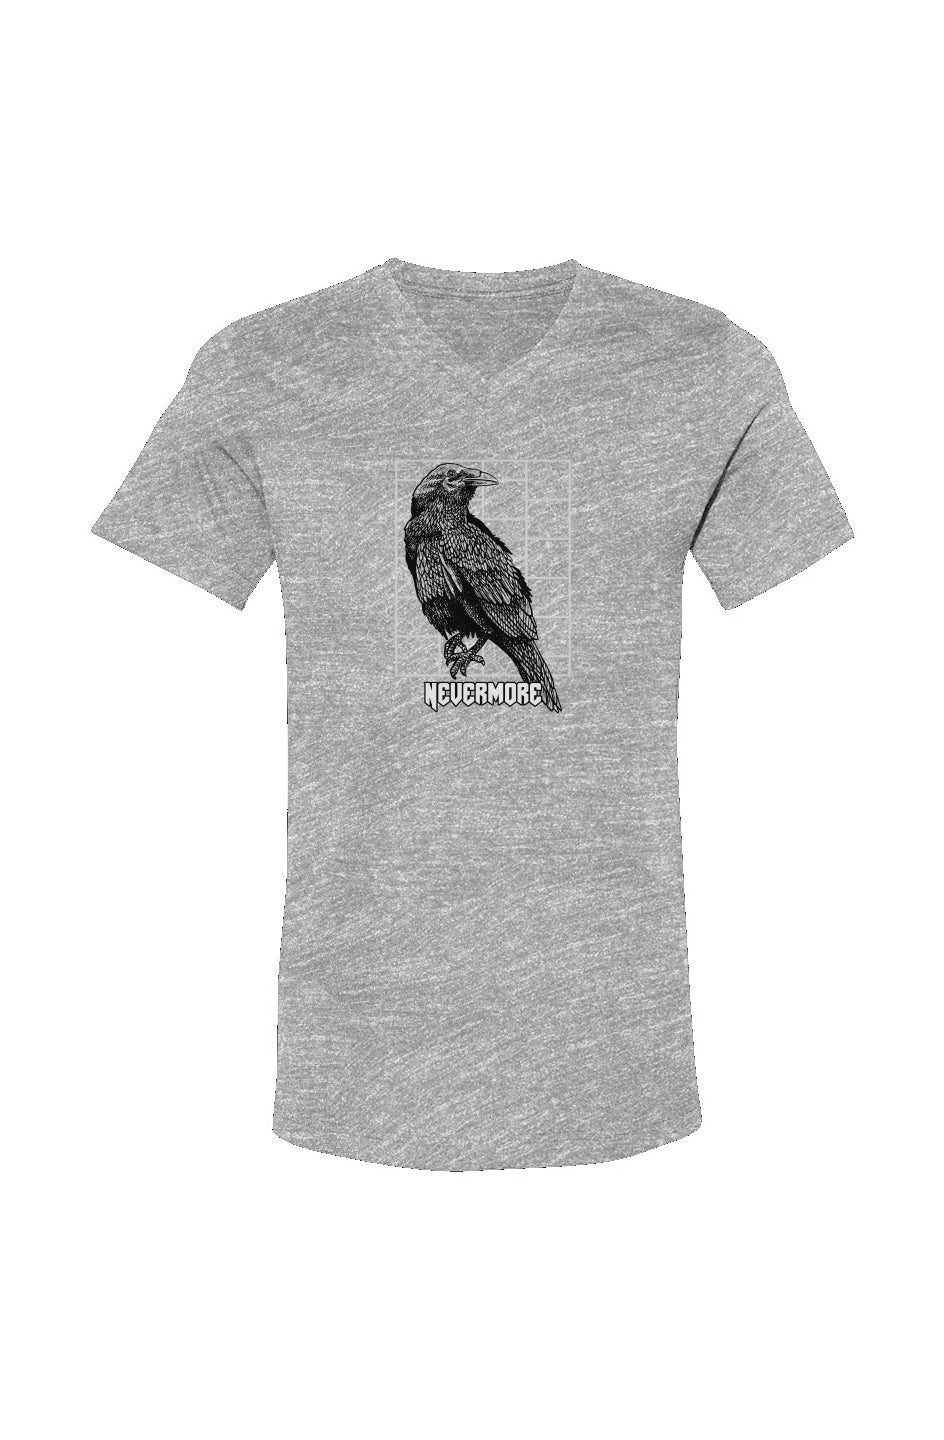 "Nevermore" Unisex Fit